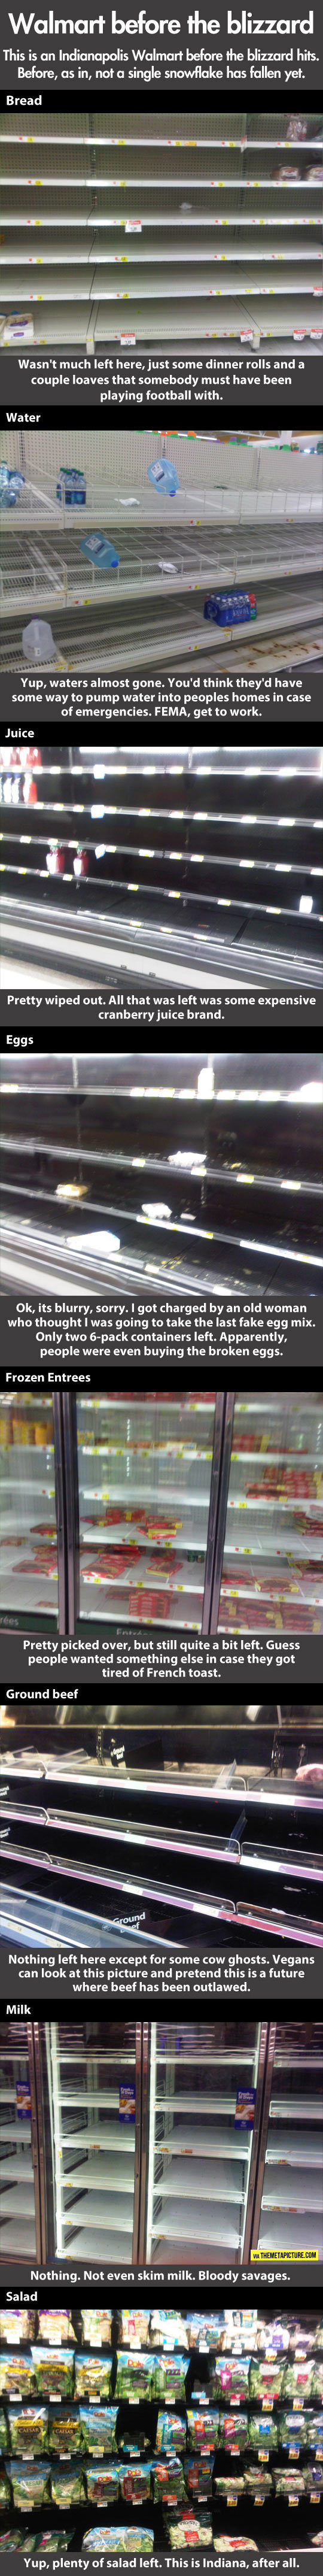 funny-Walmart-before-blizzard-food